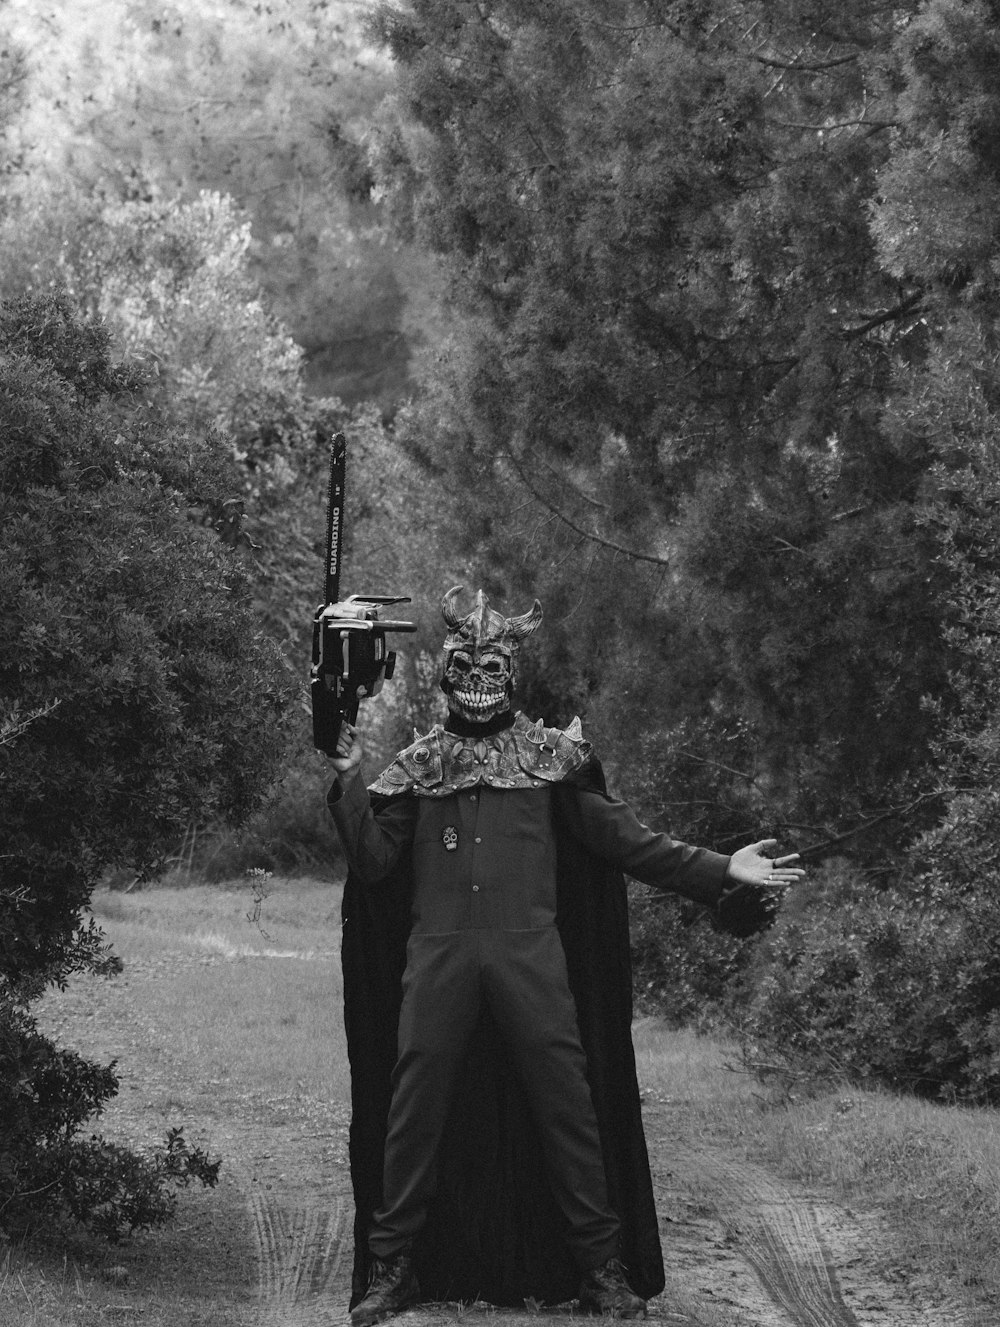 a man in a costume is standing on a dirt road